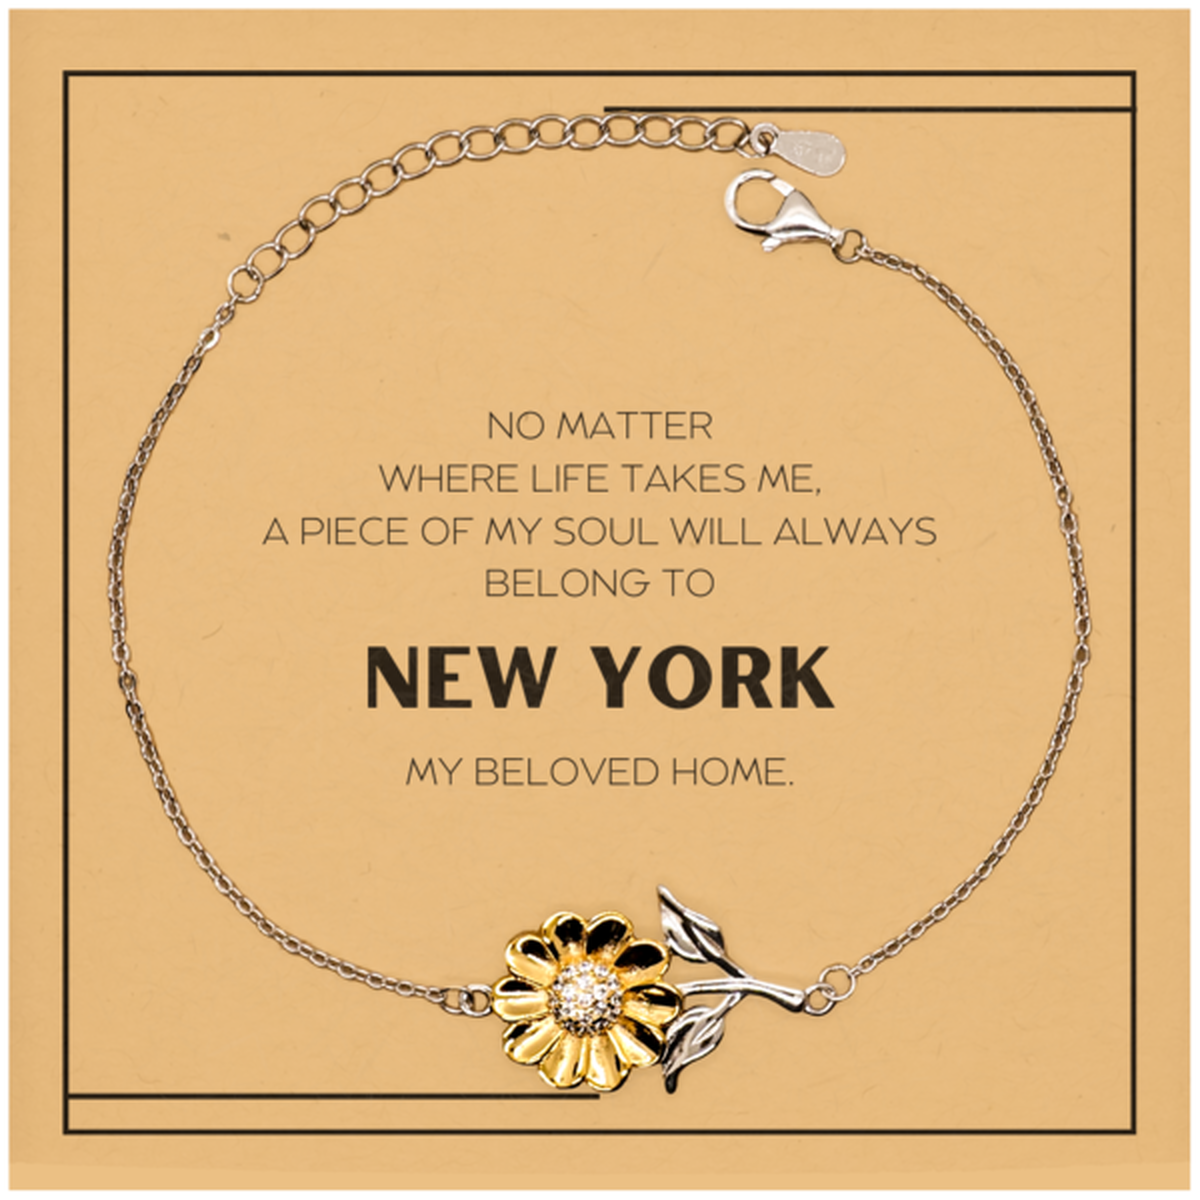 Love New York State Gifts, My soul will always belong to New York, Proud Sunflower Bracelet, Birthday Christmas Unique Gifts For New York Men, Women, Friends